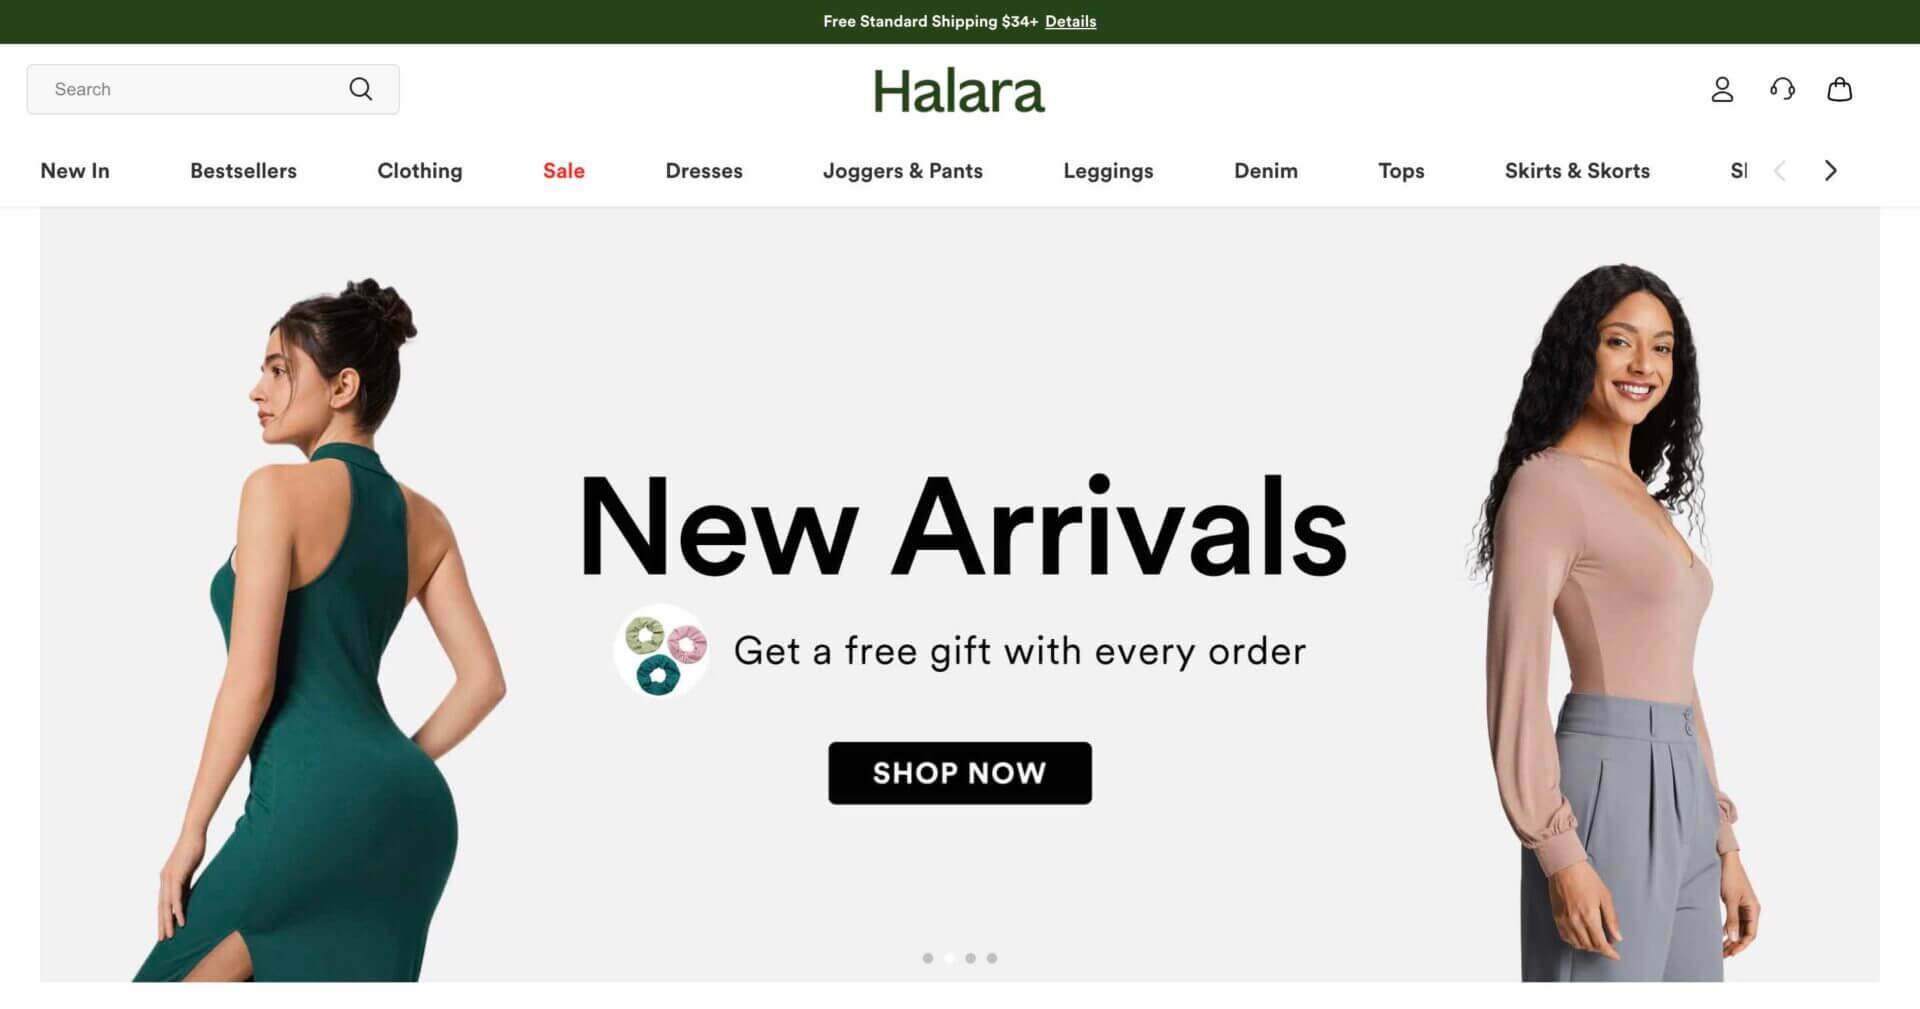 These outfits from Halara are perfect for my upcoming cruise! The